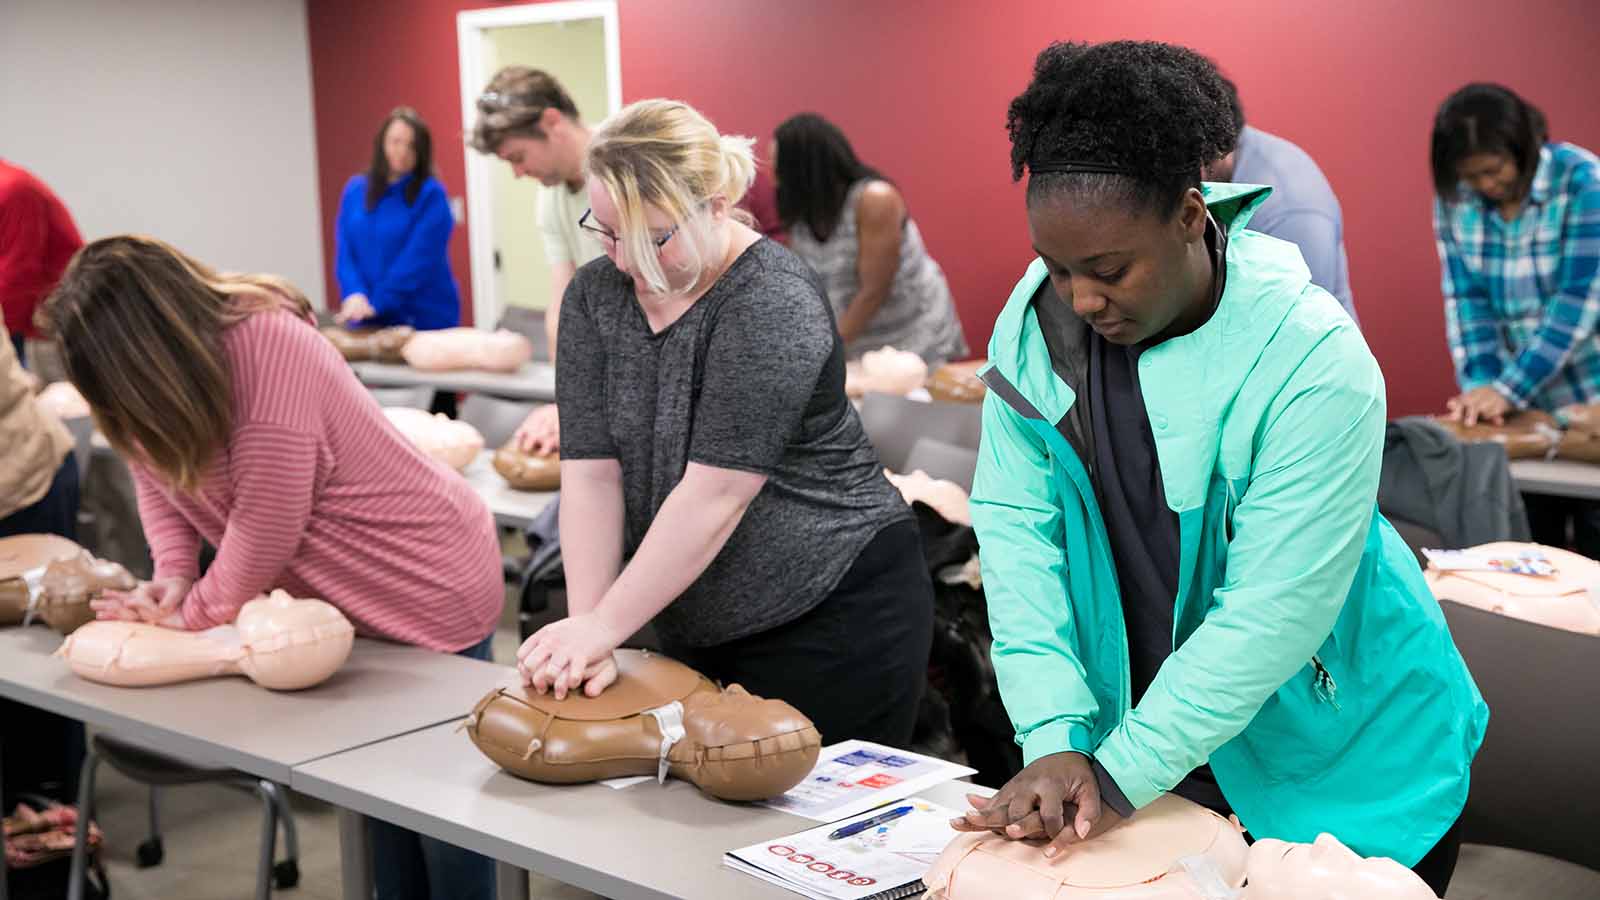 Prepare for a Crisis with Save a Life Training